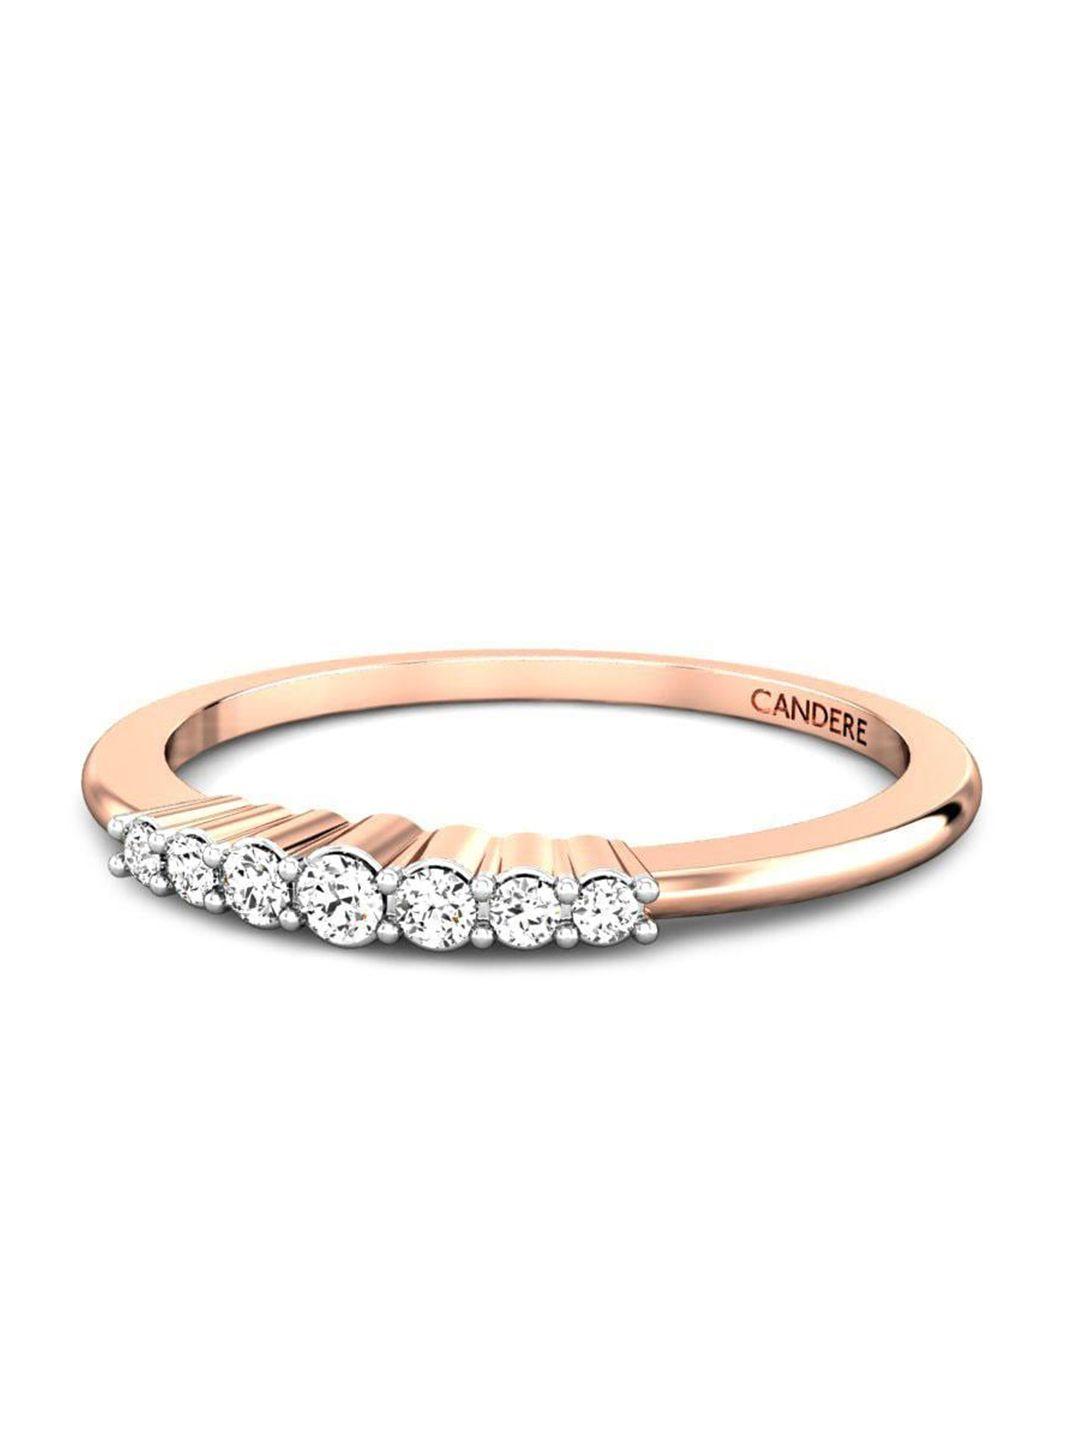 candere a kalyan jewellers company cubic zirconia studded 18kt rose gold ring-1.68gm